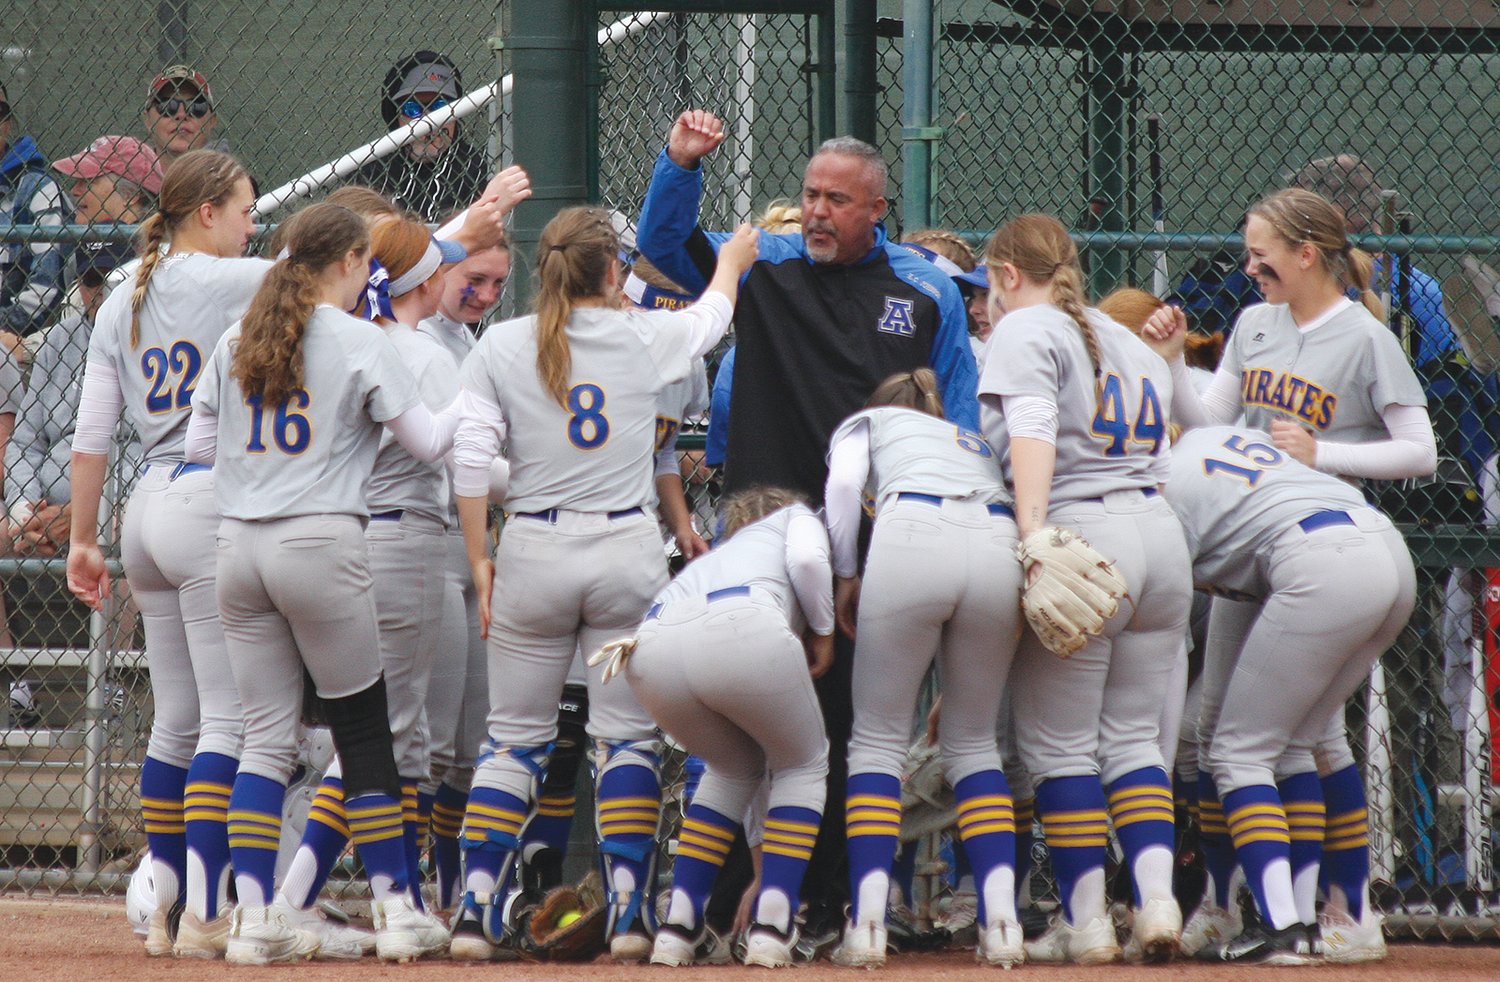 Sarah Burdick / For The Chronicle.Adna athletic director K.C. Johnson gives the Pirate softball team a pregame speech prior to the 2B state softball championship game on May 28 in Yakima.